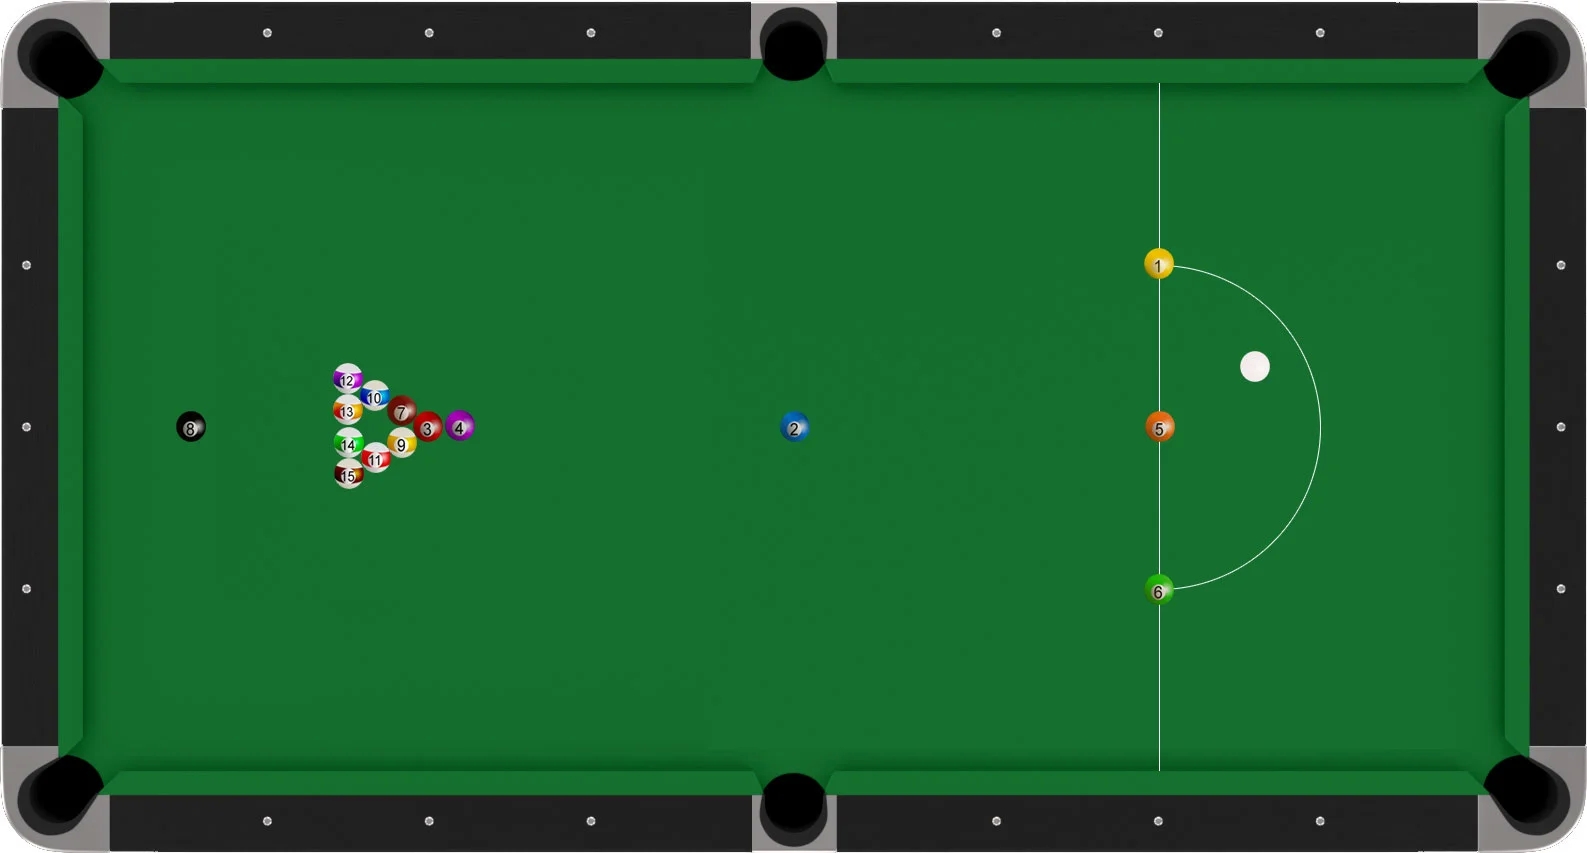 What are the primary Advantages of Playing Pool Billiards?